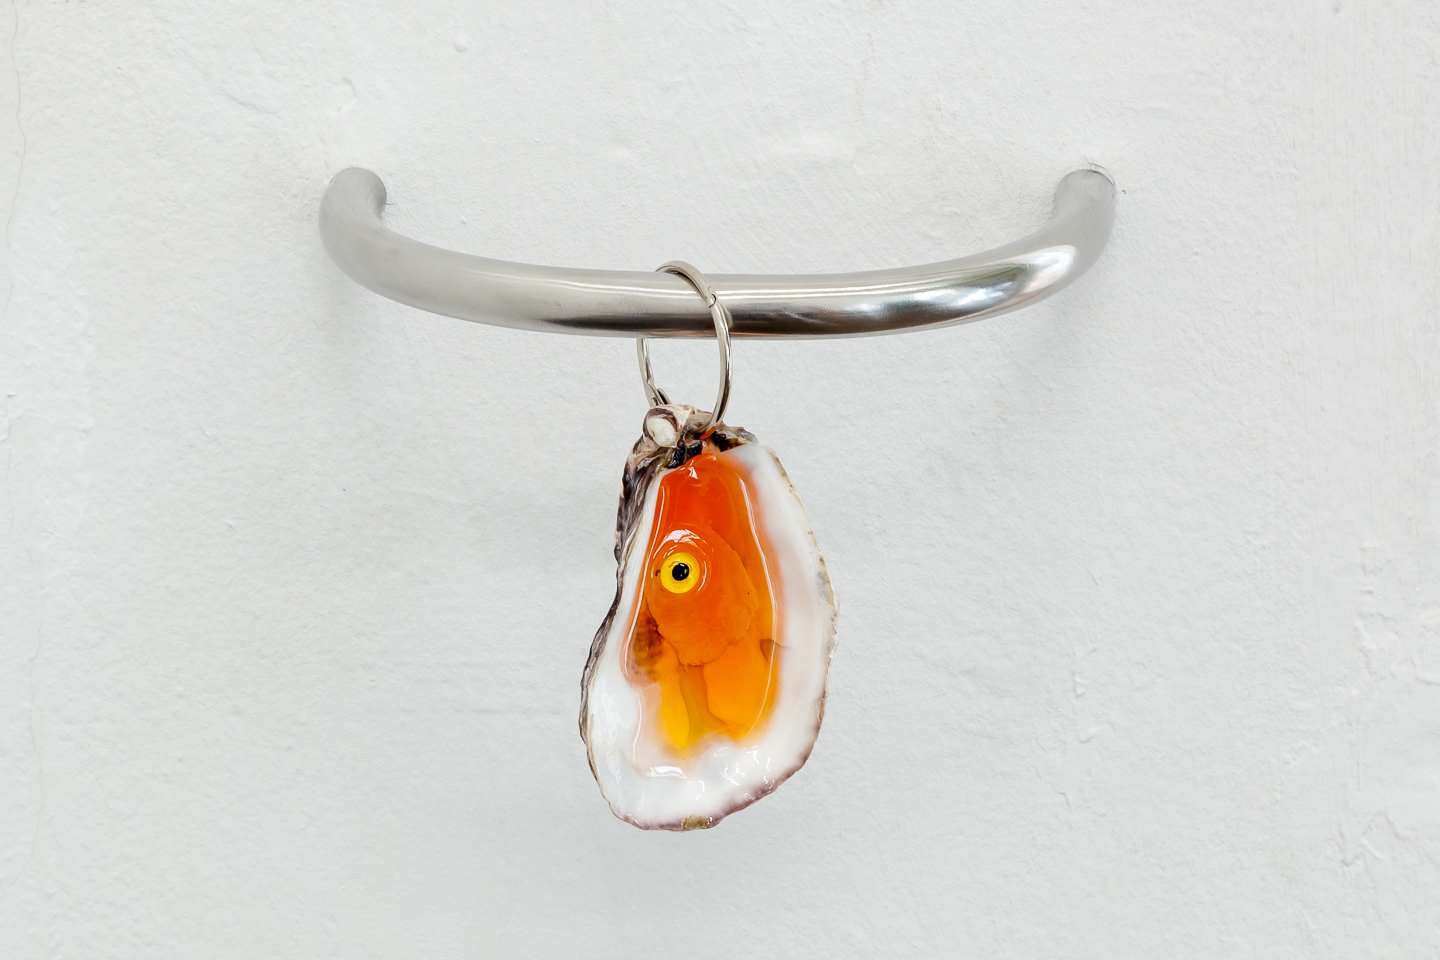 Clémentine Coupau, Trapped Pavlovas (we see you), 2021 oyster shell, eco resin, glass eye, steel, hook. variable dimensions